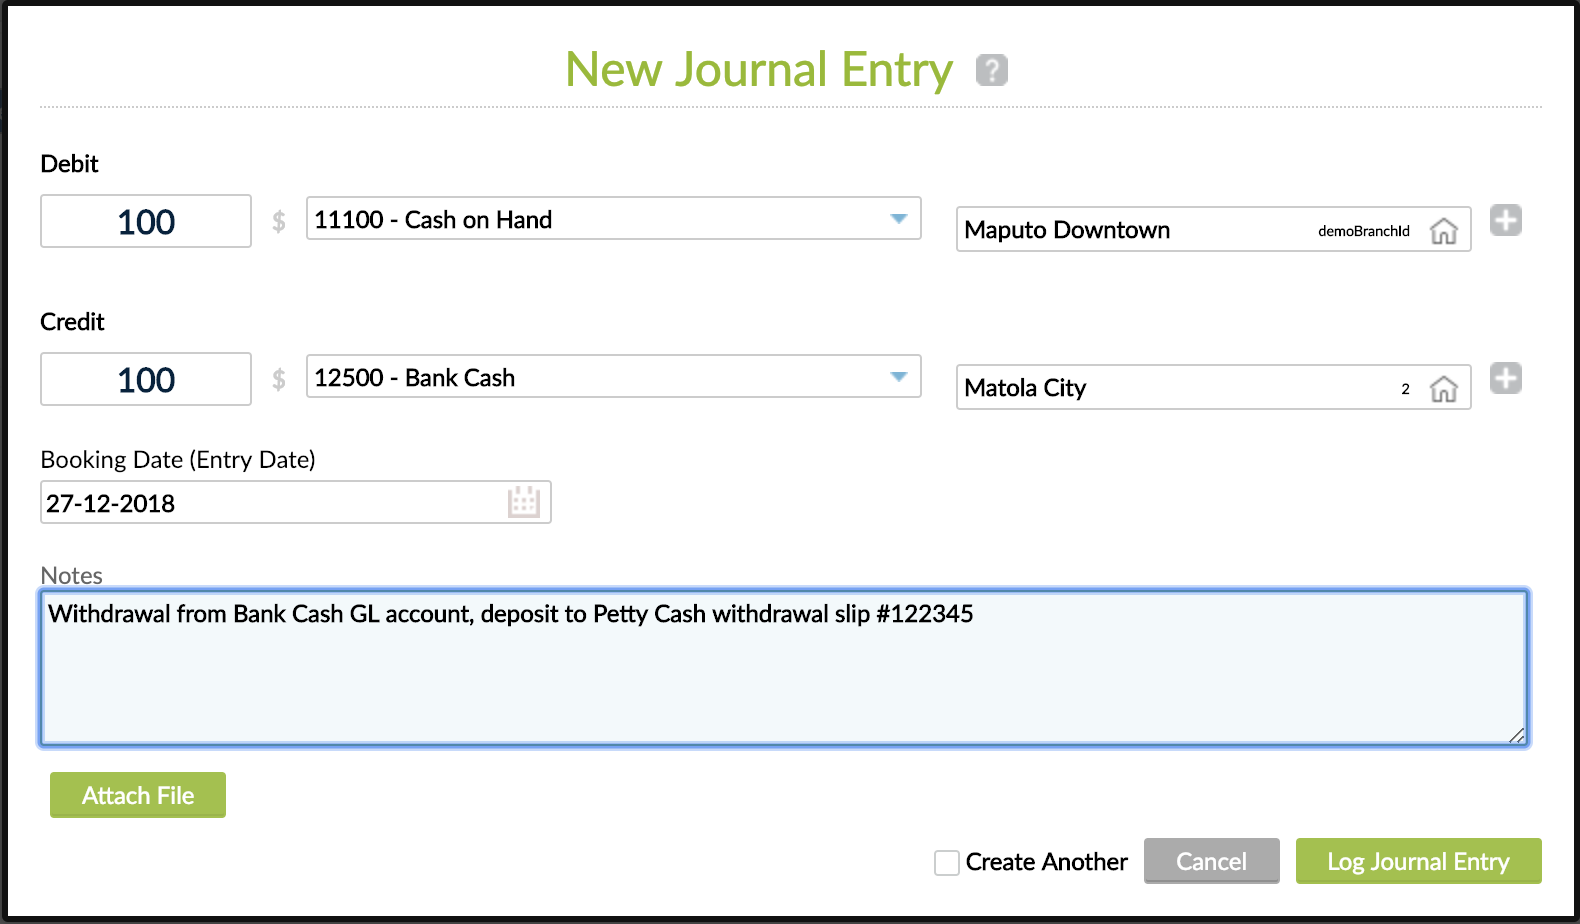 New Journal Entry view - Manual JE screen with fields like Debit/Credit, GL Account, Branch, Booking Date and Notes. The buttons found are Attach File, Cancel and Log Journal Entry. 